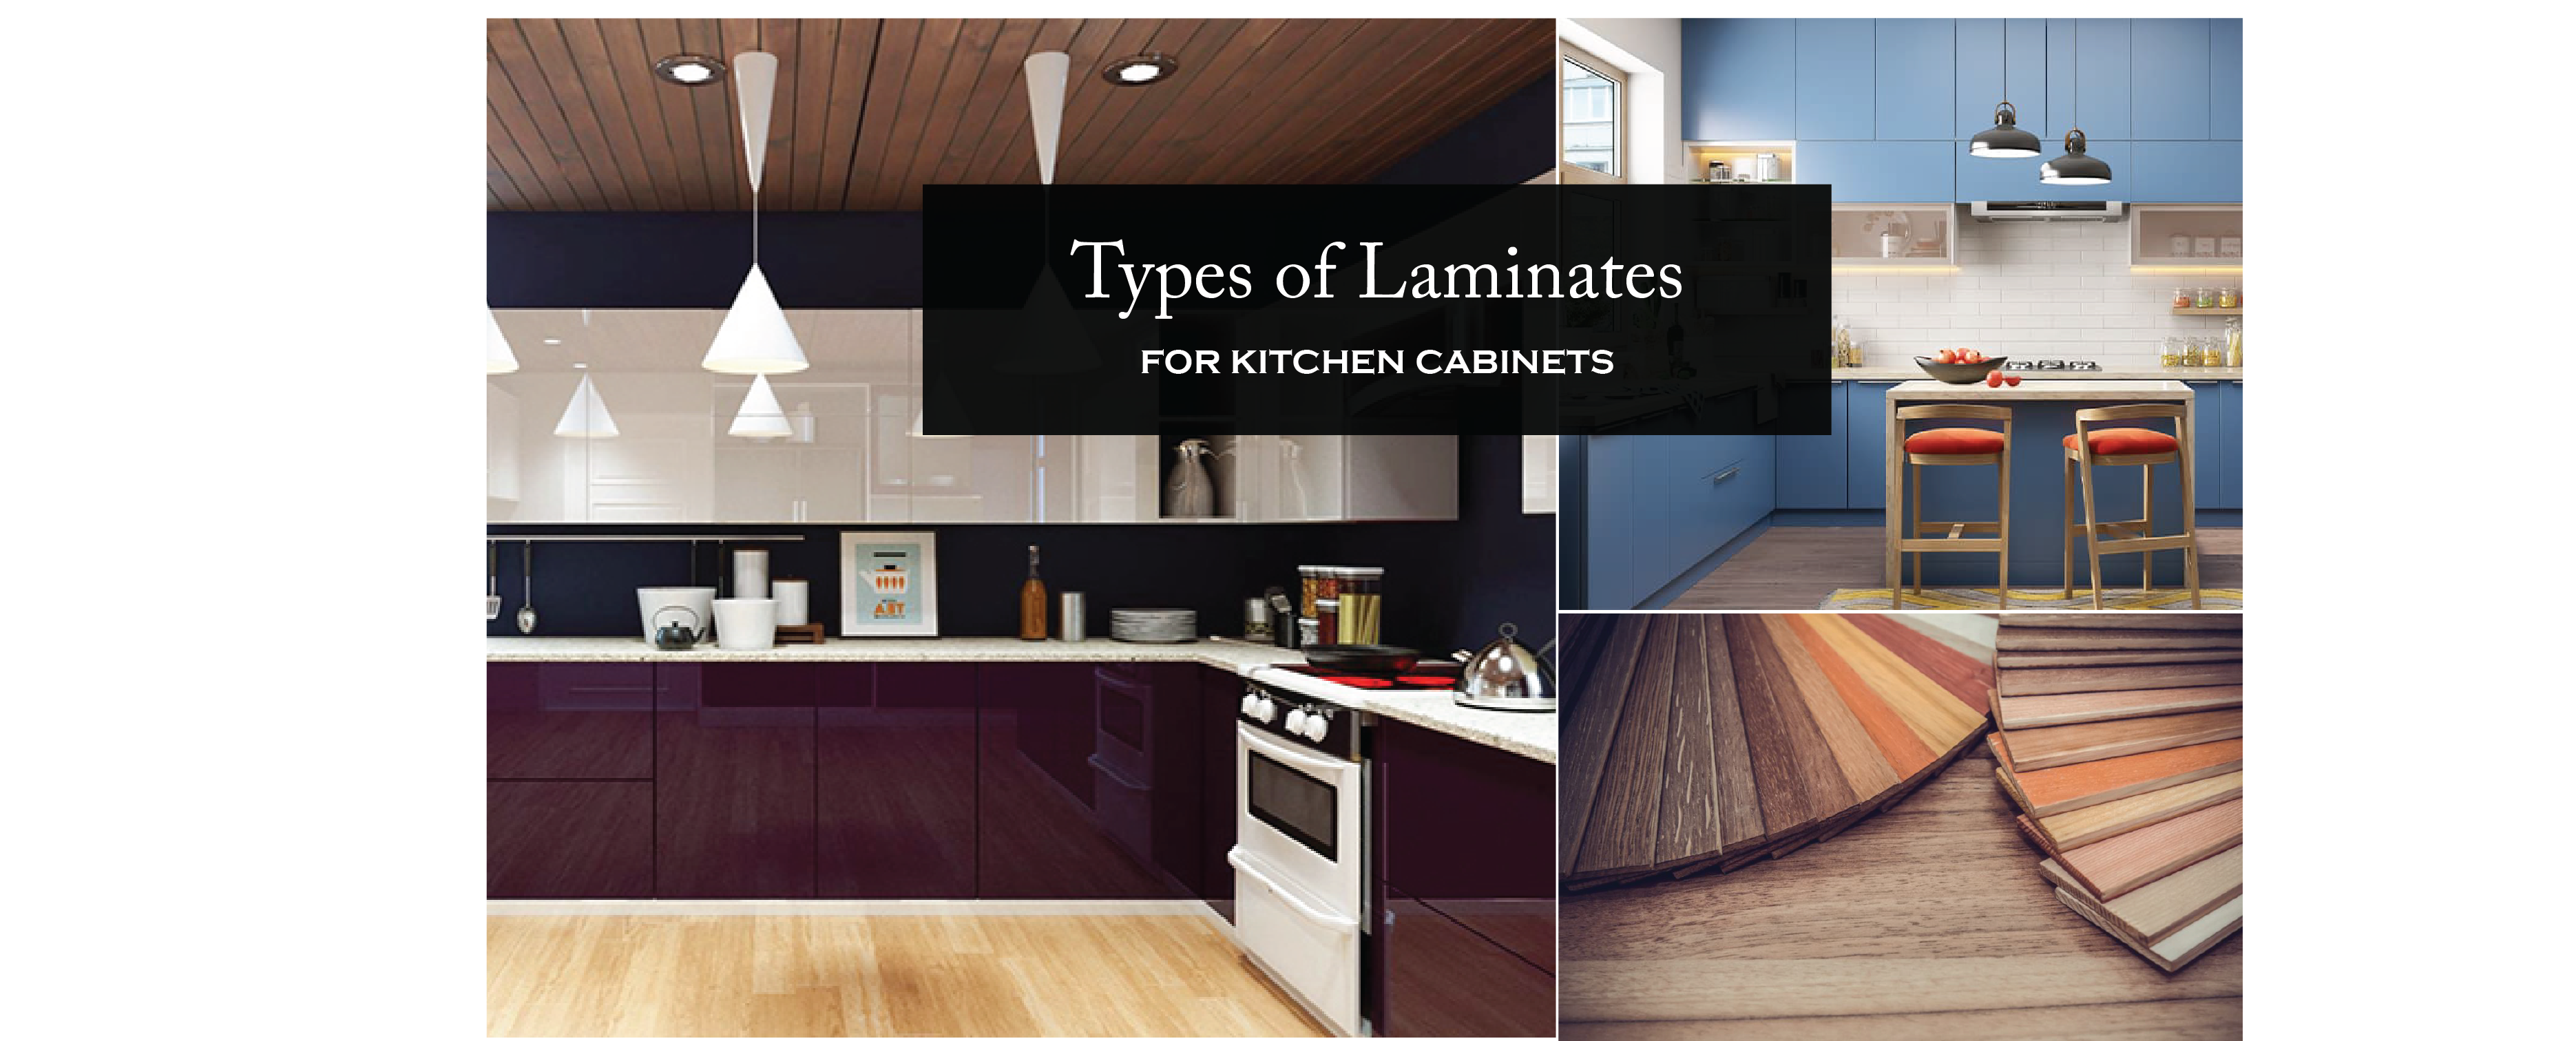 Types Of Laminates For Kitchen Cabinets - The Constructor